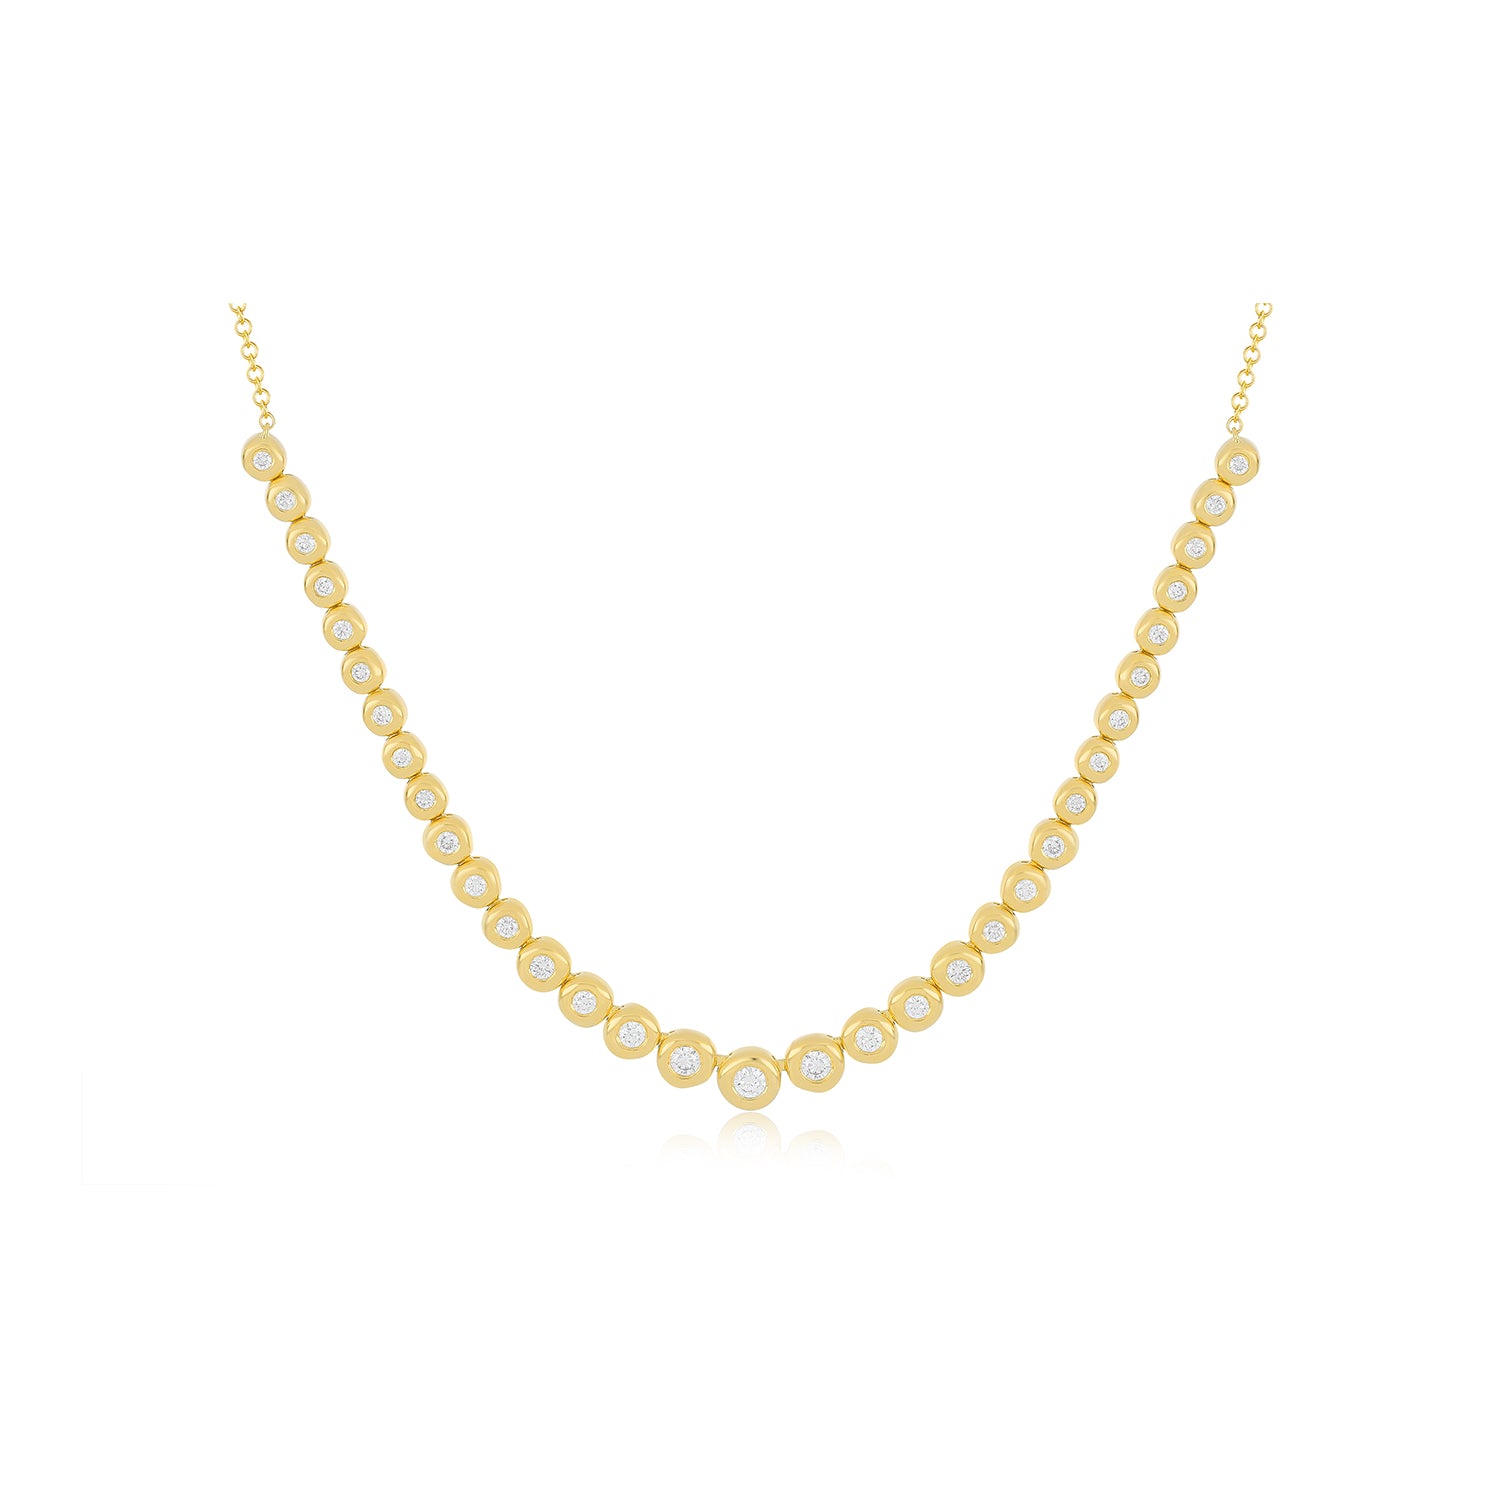 Graduated Diamond Pillow Necklace in 14k yellow gold